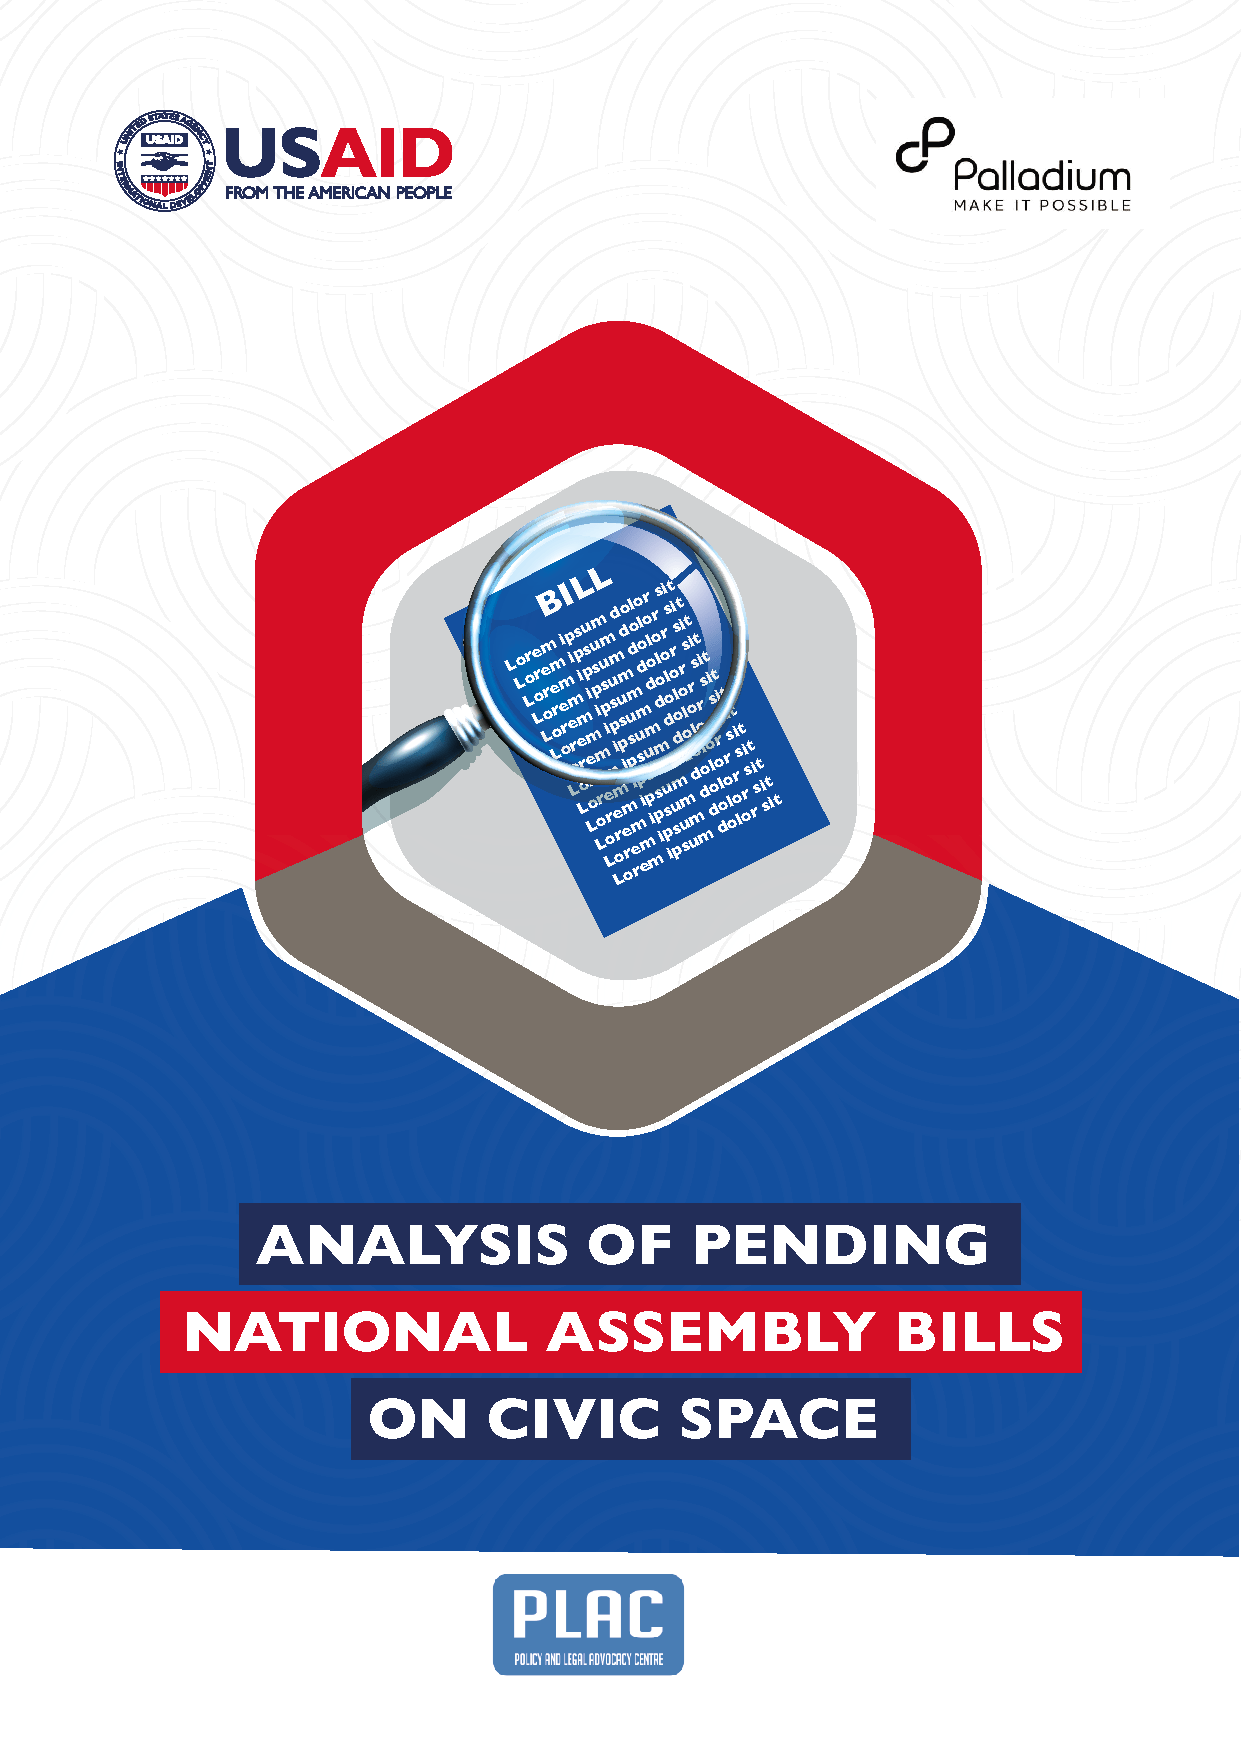 Analysis of pending NASS bill on civic space